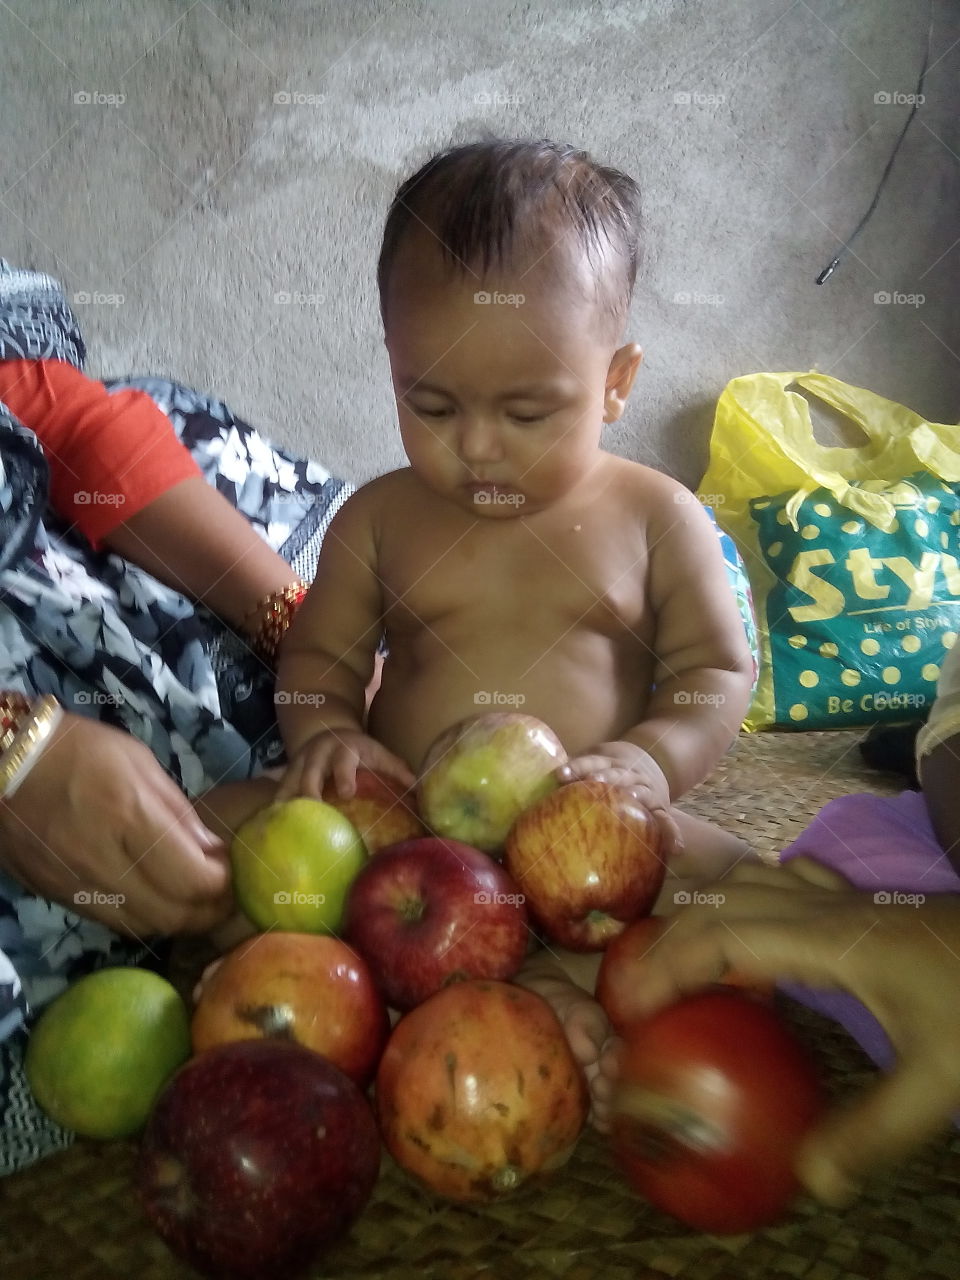 baby is so cute with some fresh fruits.